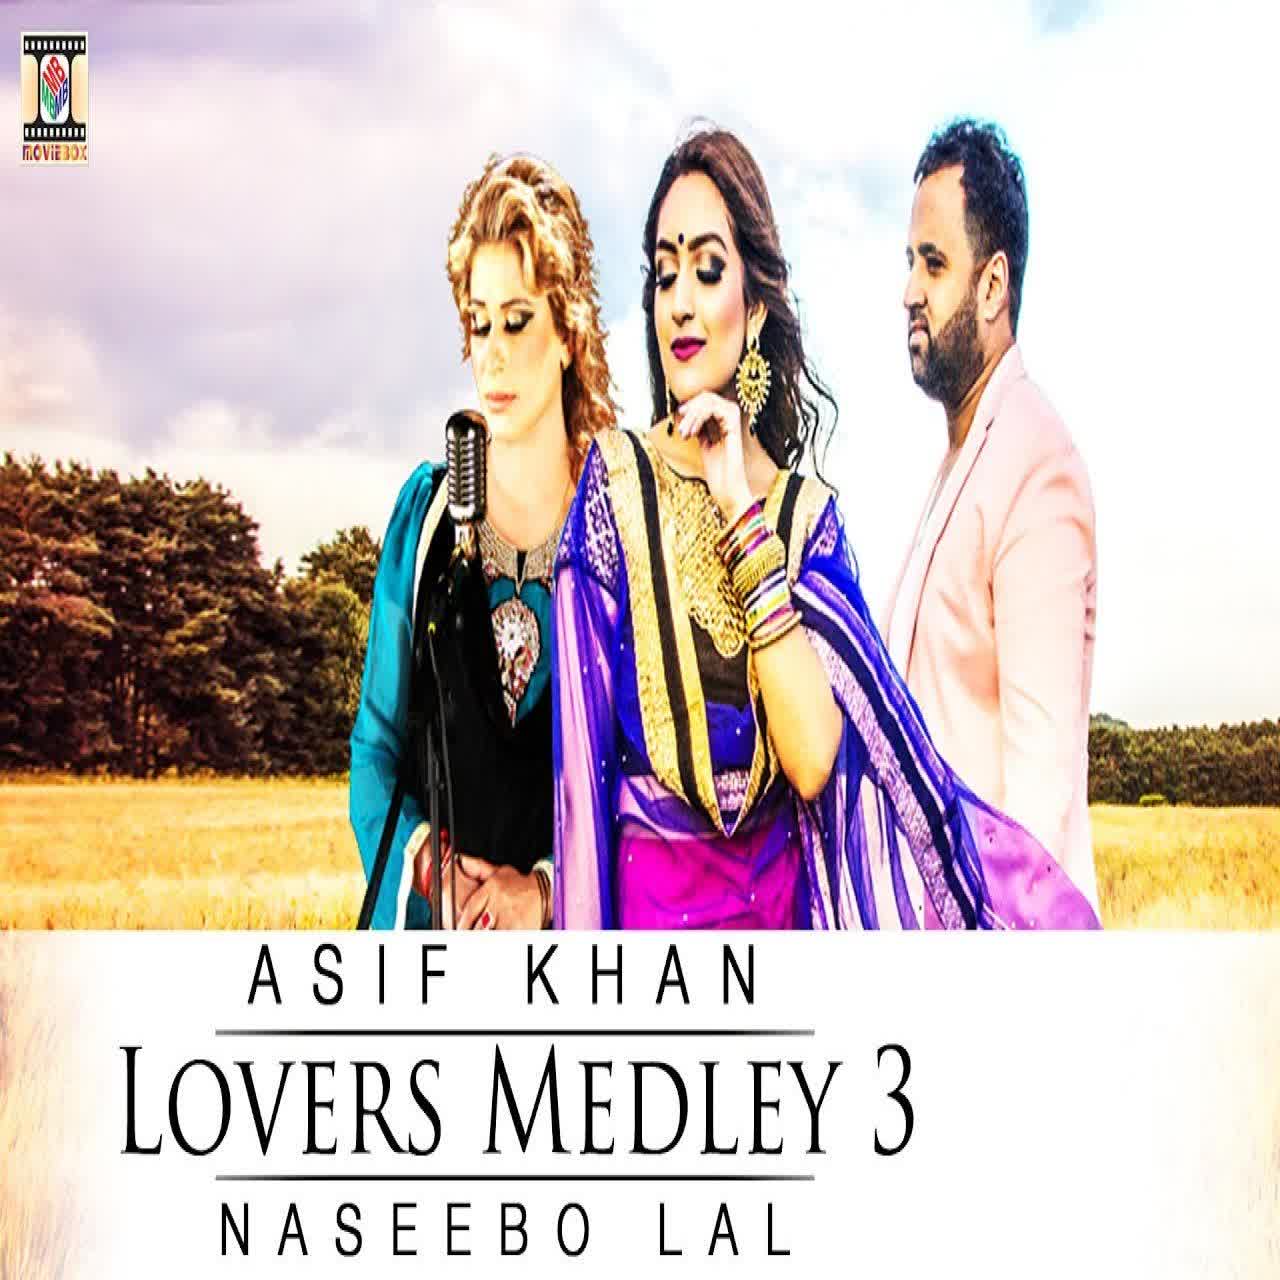 Discover your next favorite Punjabi love song